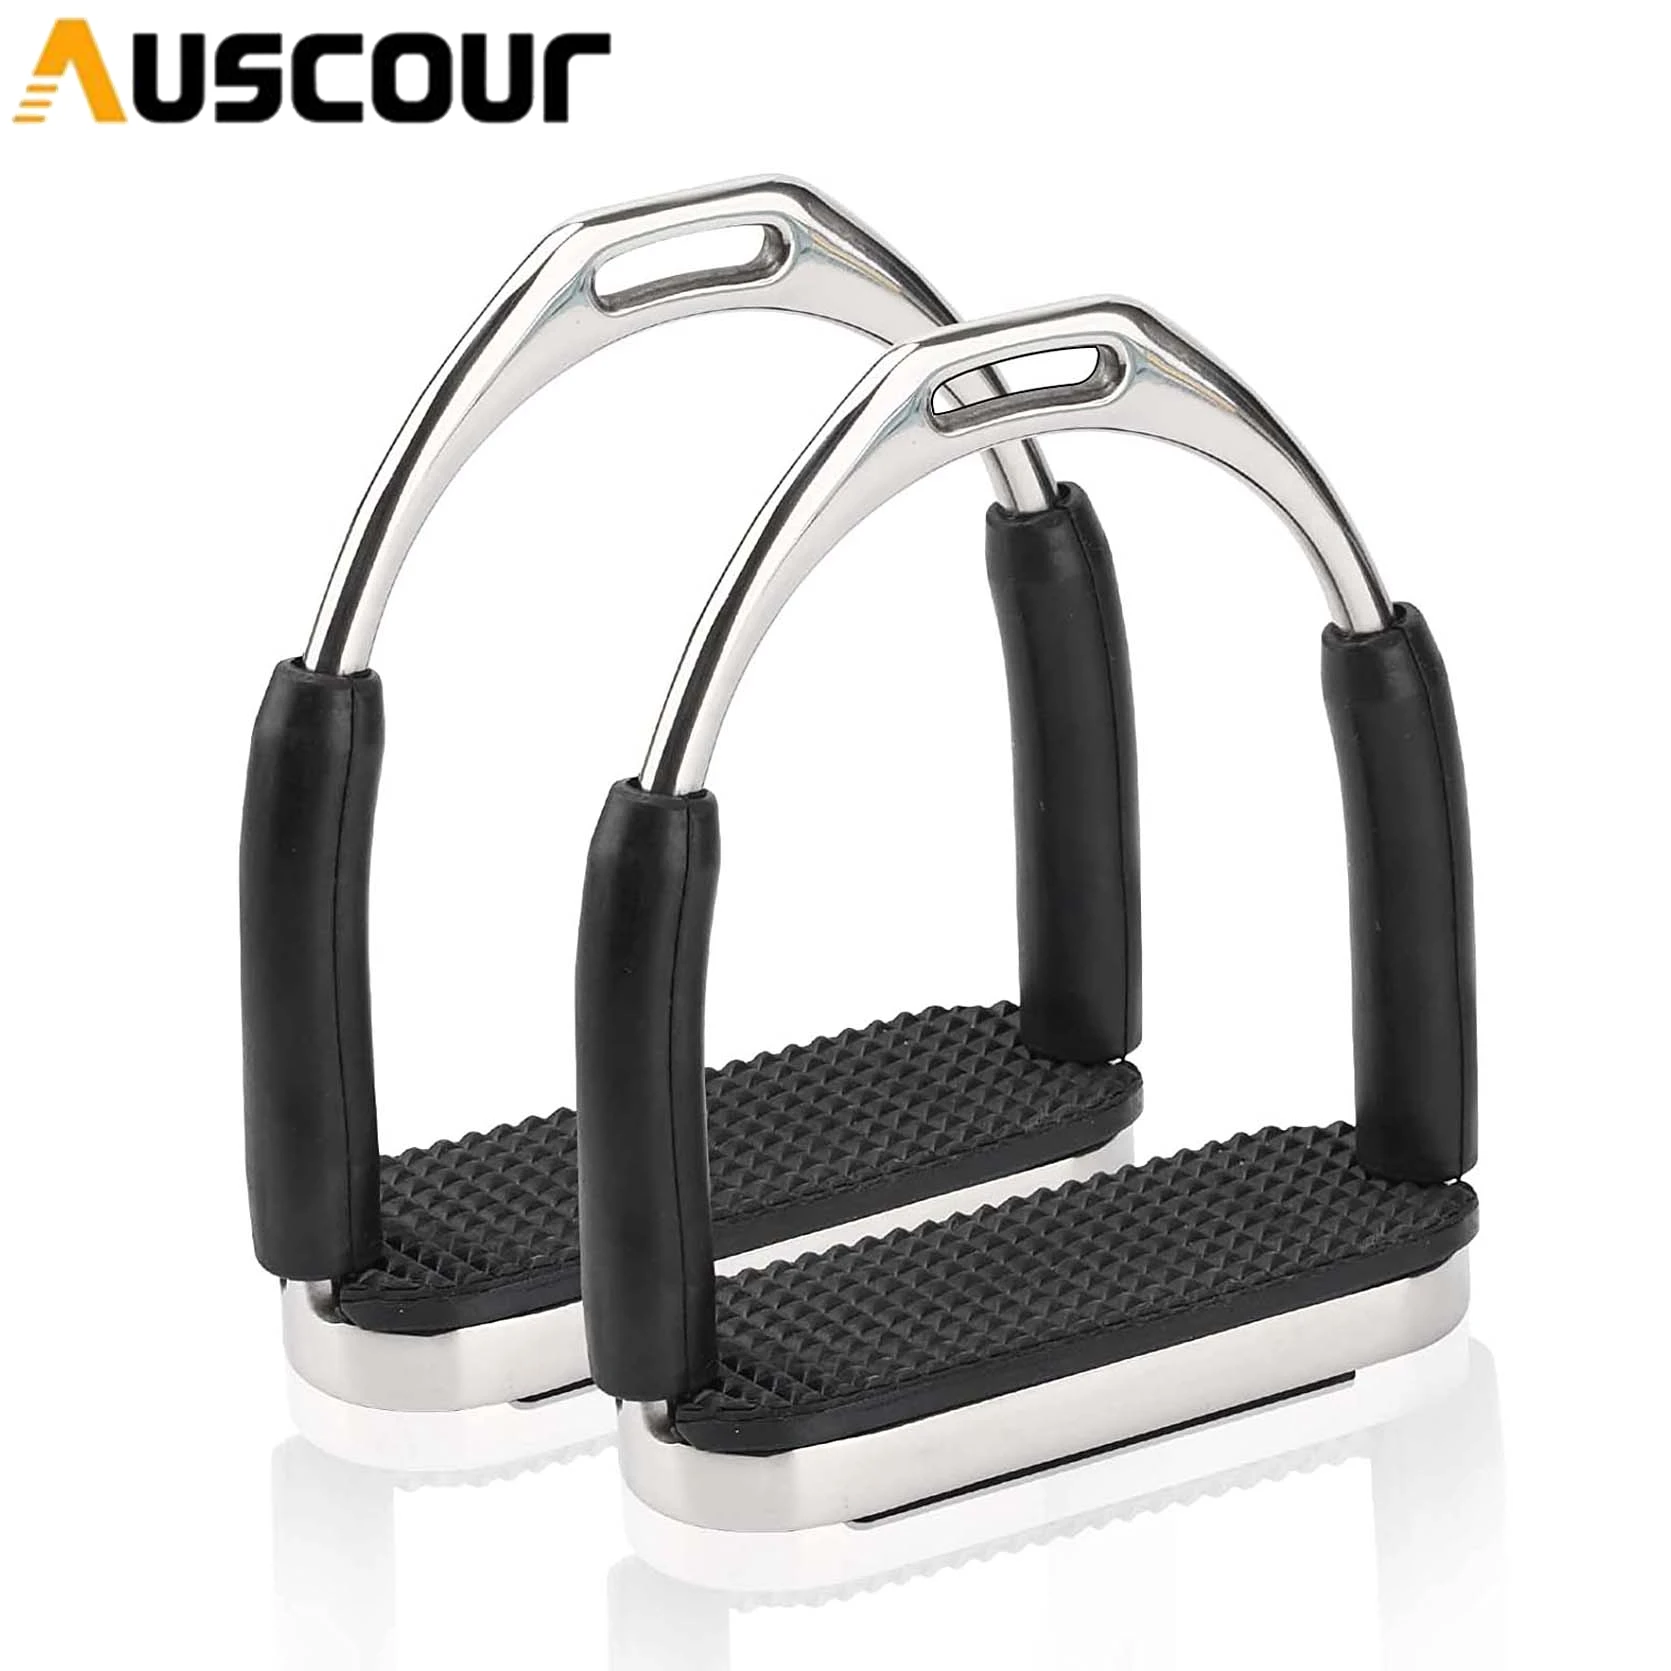 

Flex Stirrups English Stirrups Saddle Heavy Duty Stainless Steel Western Stirrups with Rubber Pad Knee Ankle Stress Pain Relief